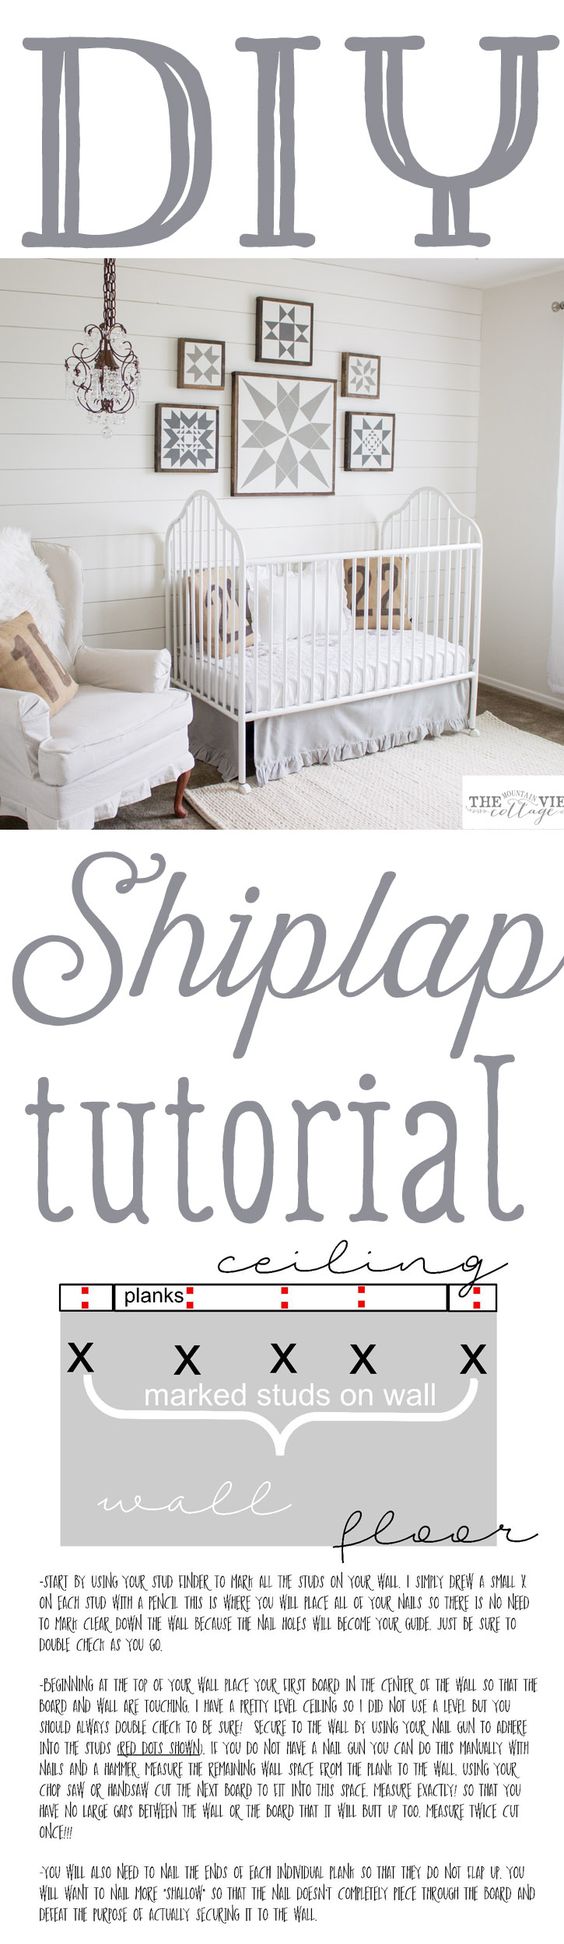 Diy- Full Tutorial on how to create that beautiful shiplap look in your home! This is especially great for 